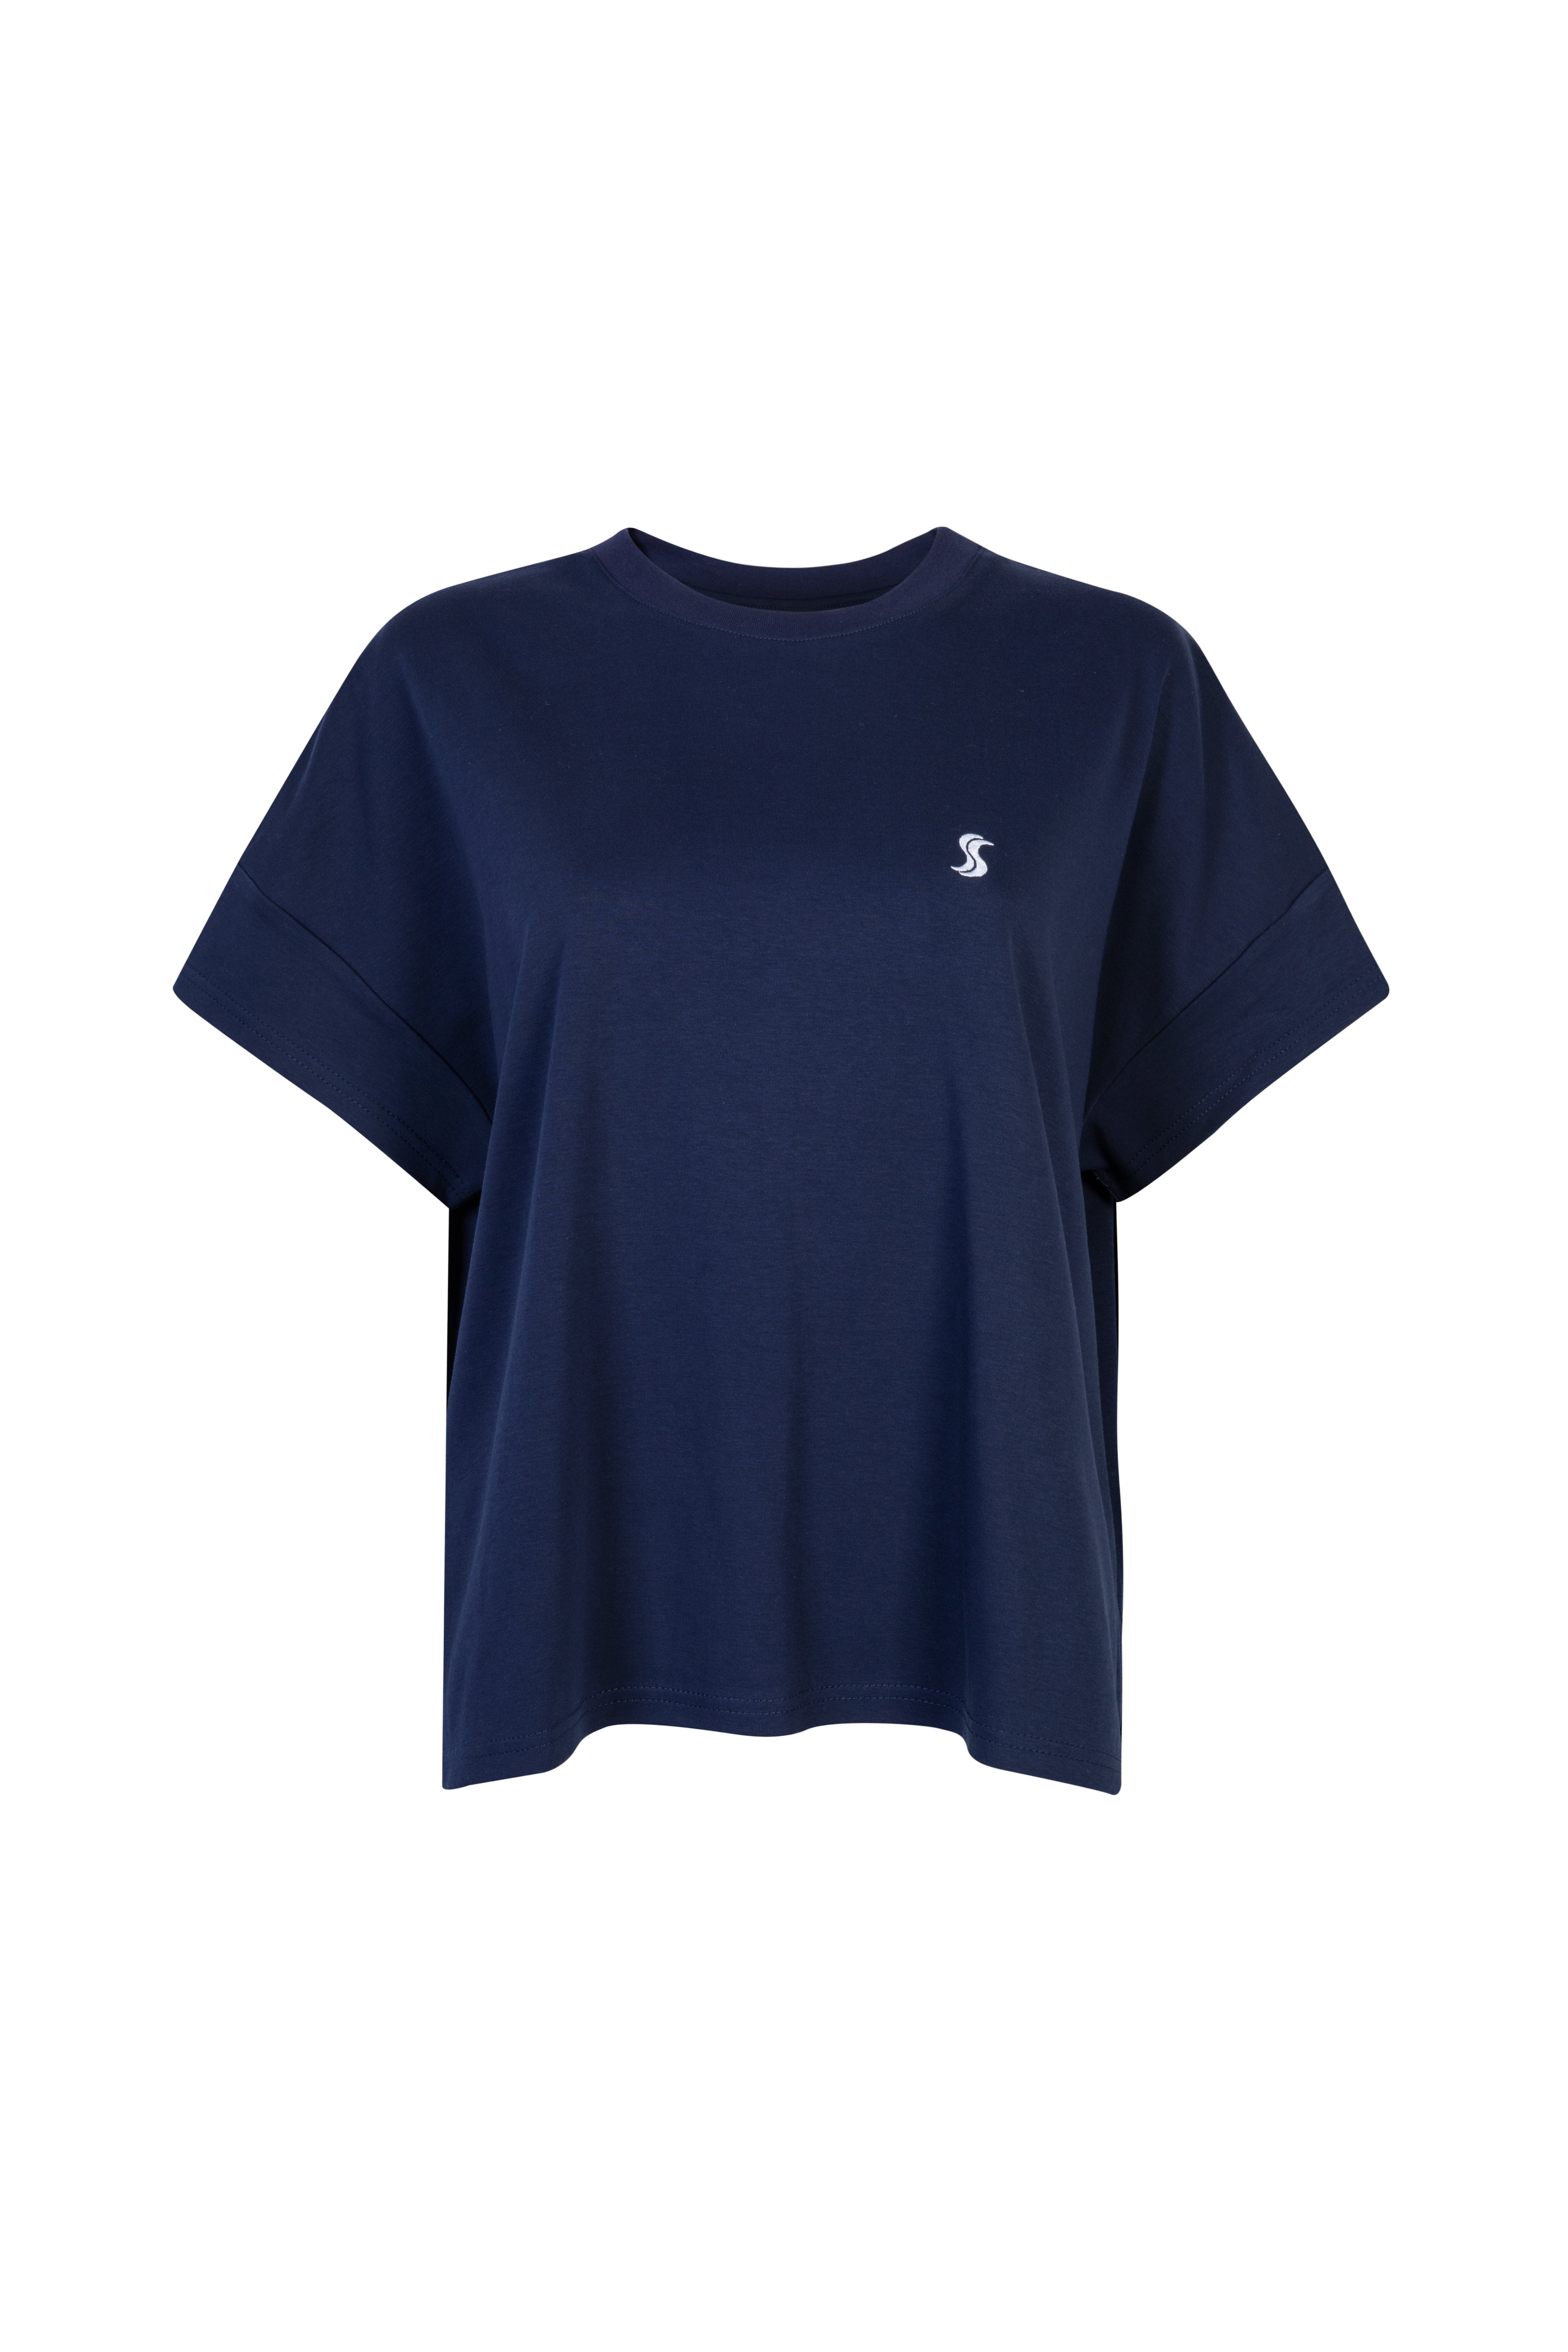 Navy T-Shirt w/embroidered Logo - Local 798